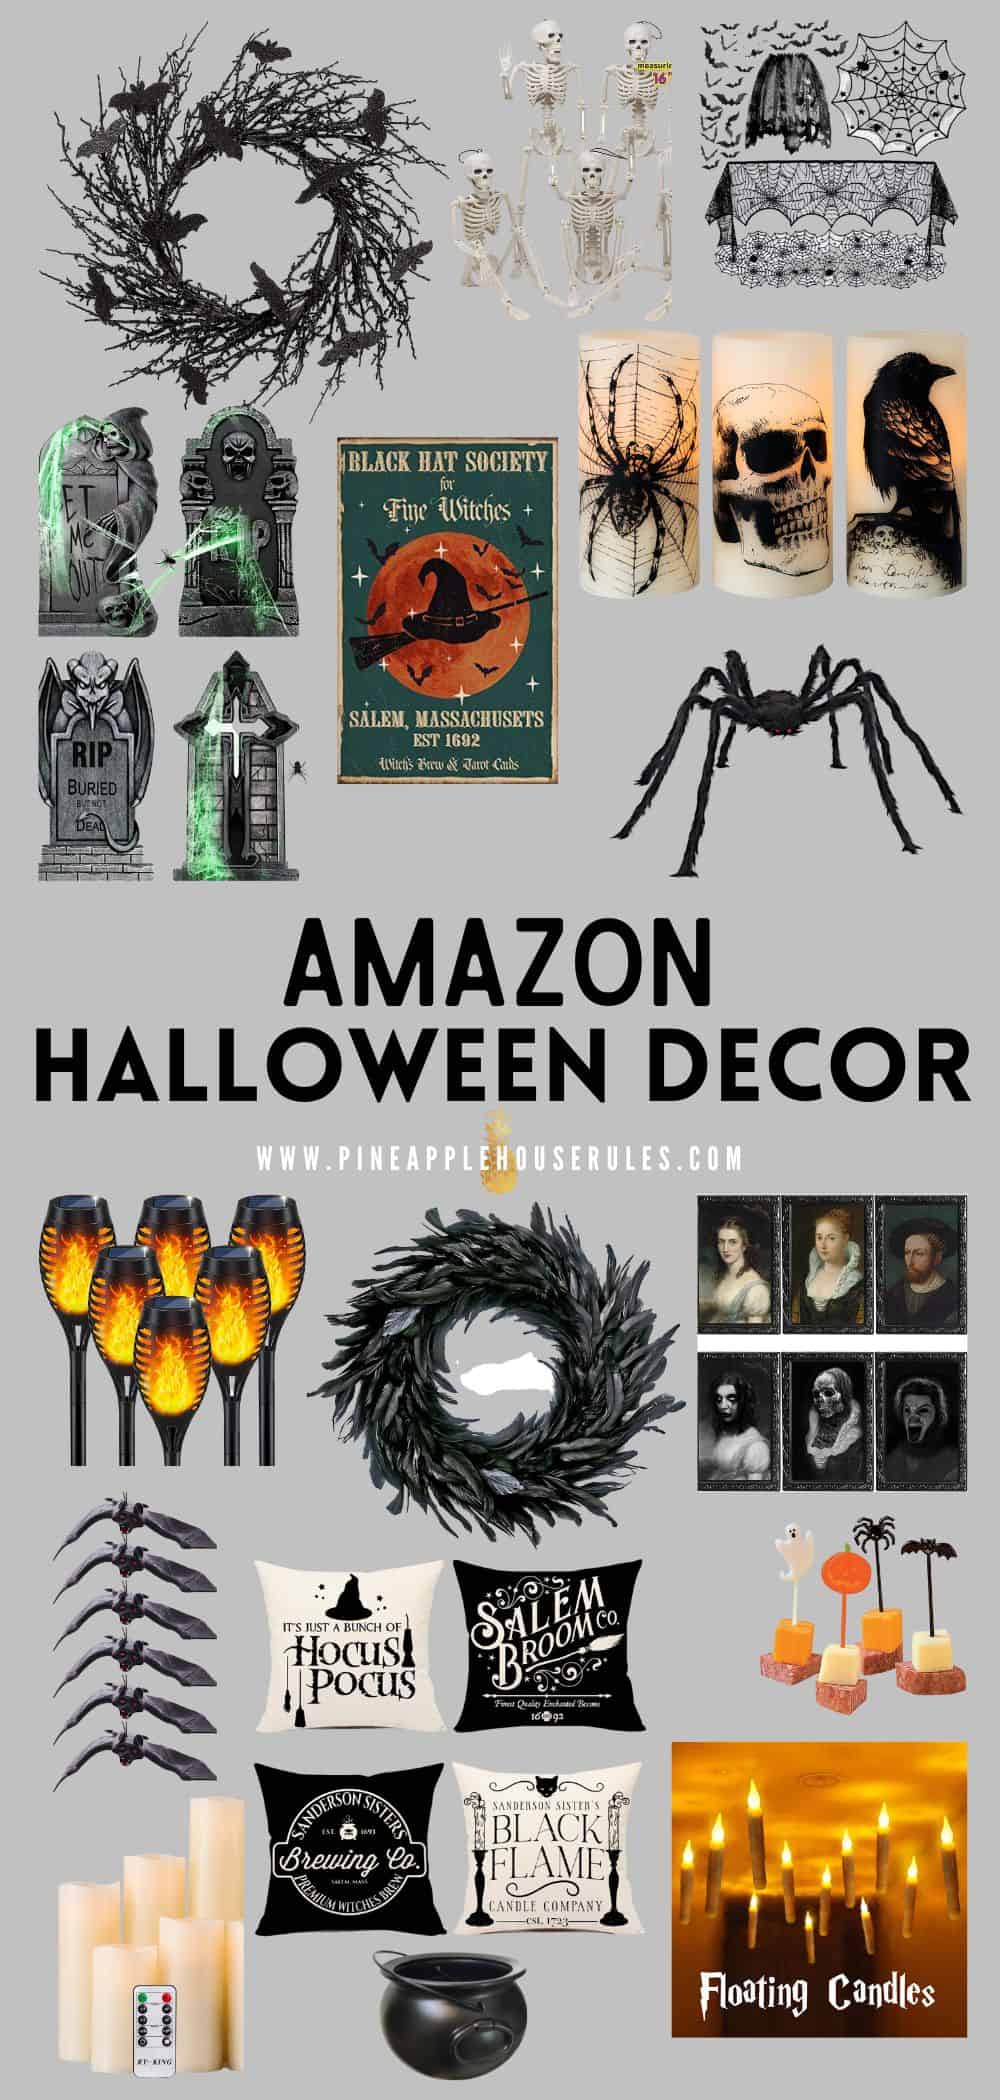 This post is all about Amazon Halloween Decor 2022 and is full of indoor Halloween decor and outdoor Halloween decor ideas.  Amazon Halloween Decor | Amazon Halloween Decor 2022 | Halloween Decor Amazon | Amazon Halloween Decorations | Amazon Halloween Decor Finds | Best Amazon Halloween Decor | Halloween Home Decor Amazon | Halloween Decorations from Amazon | Halloween Decorations Indoor Amazon | Halloween Decorations Outdoor Amazon | Halloween Decor on Amazon | Halloween Decor | Spooky Decor